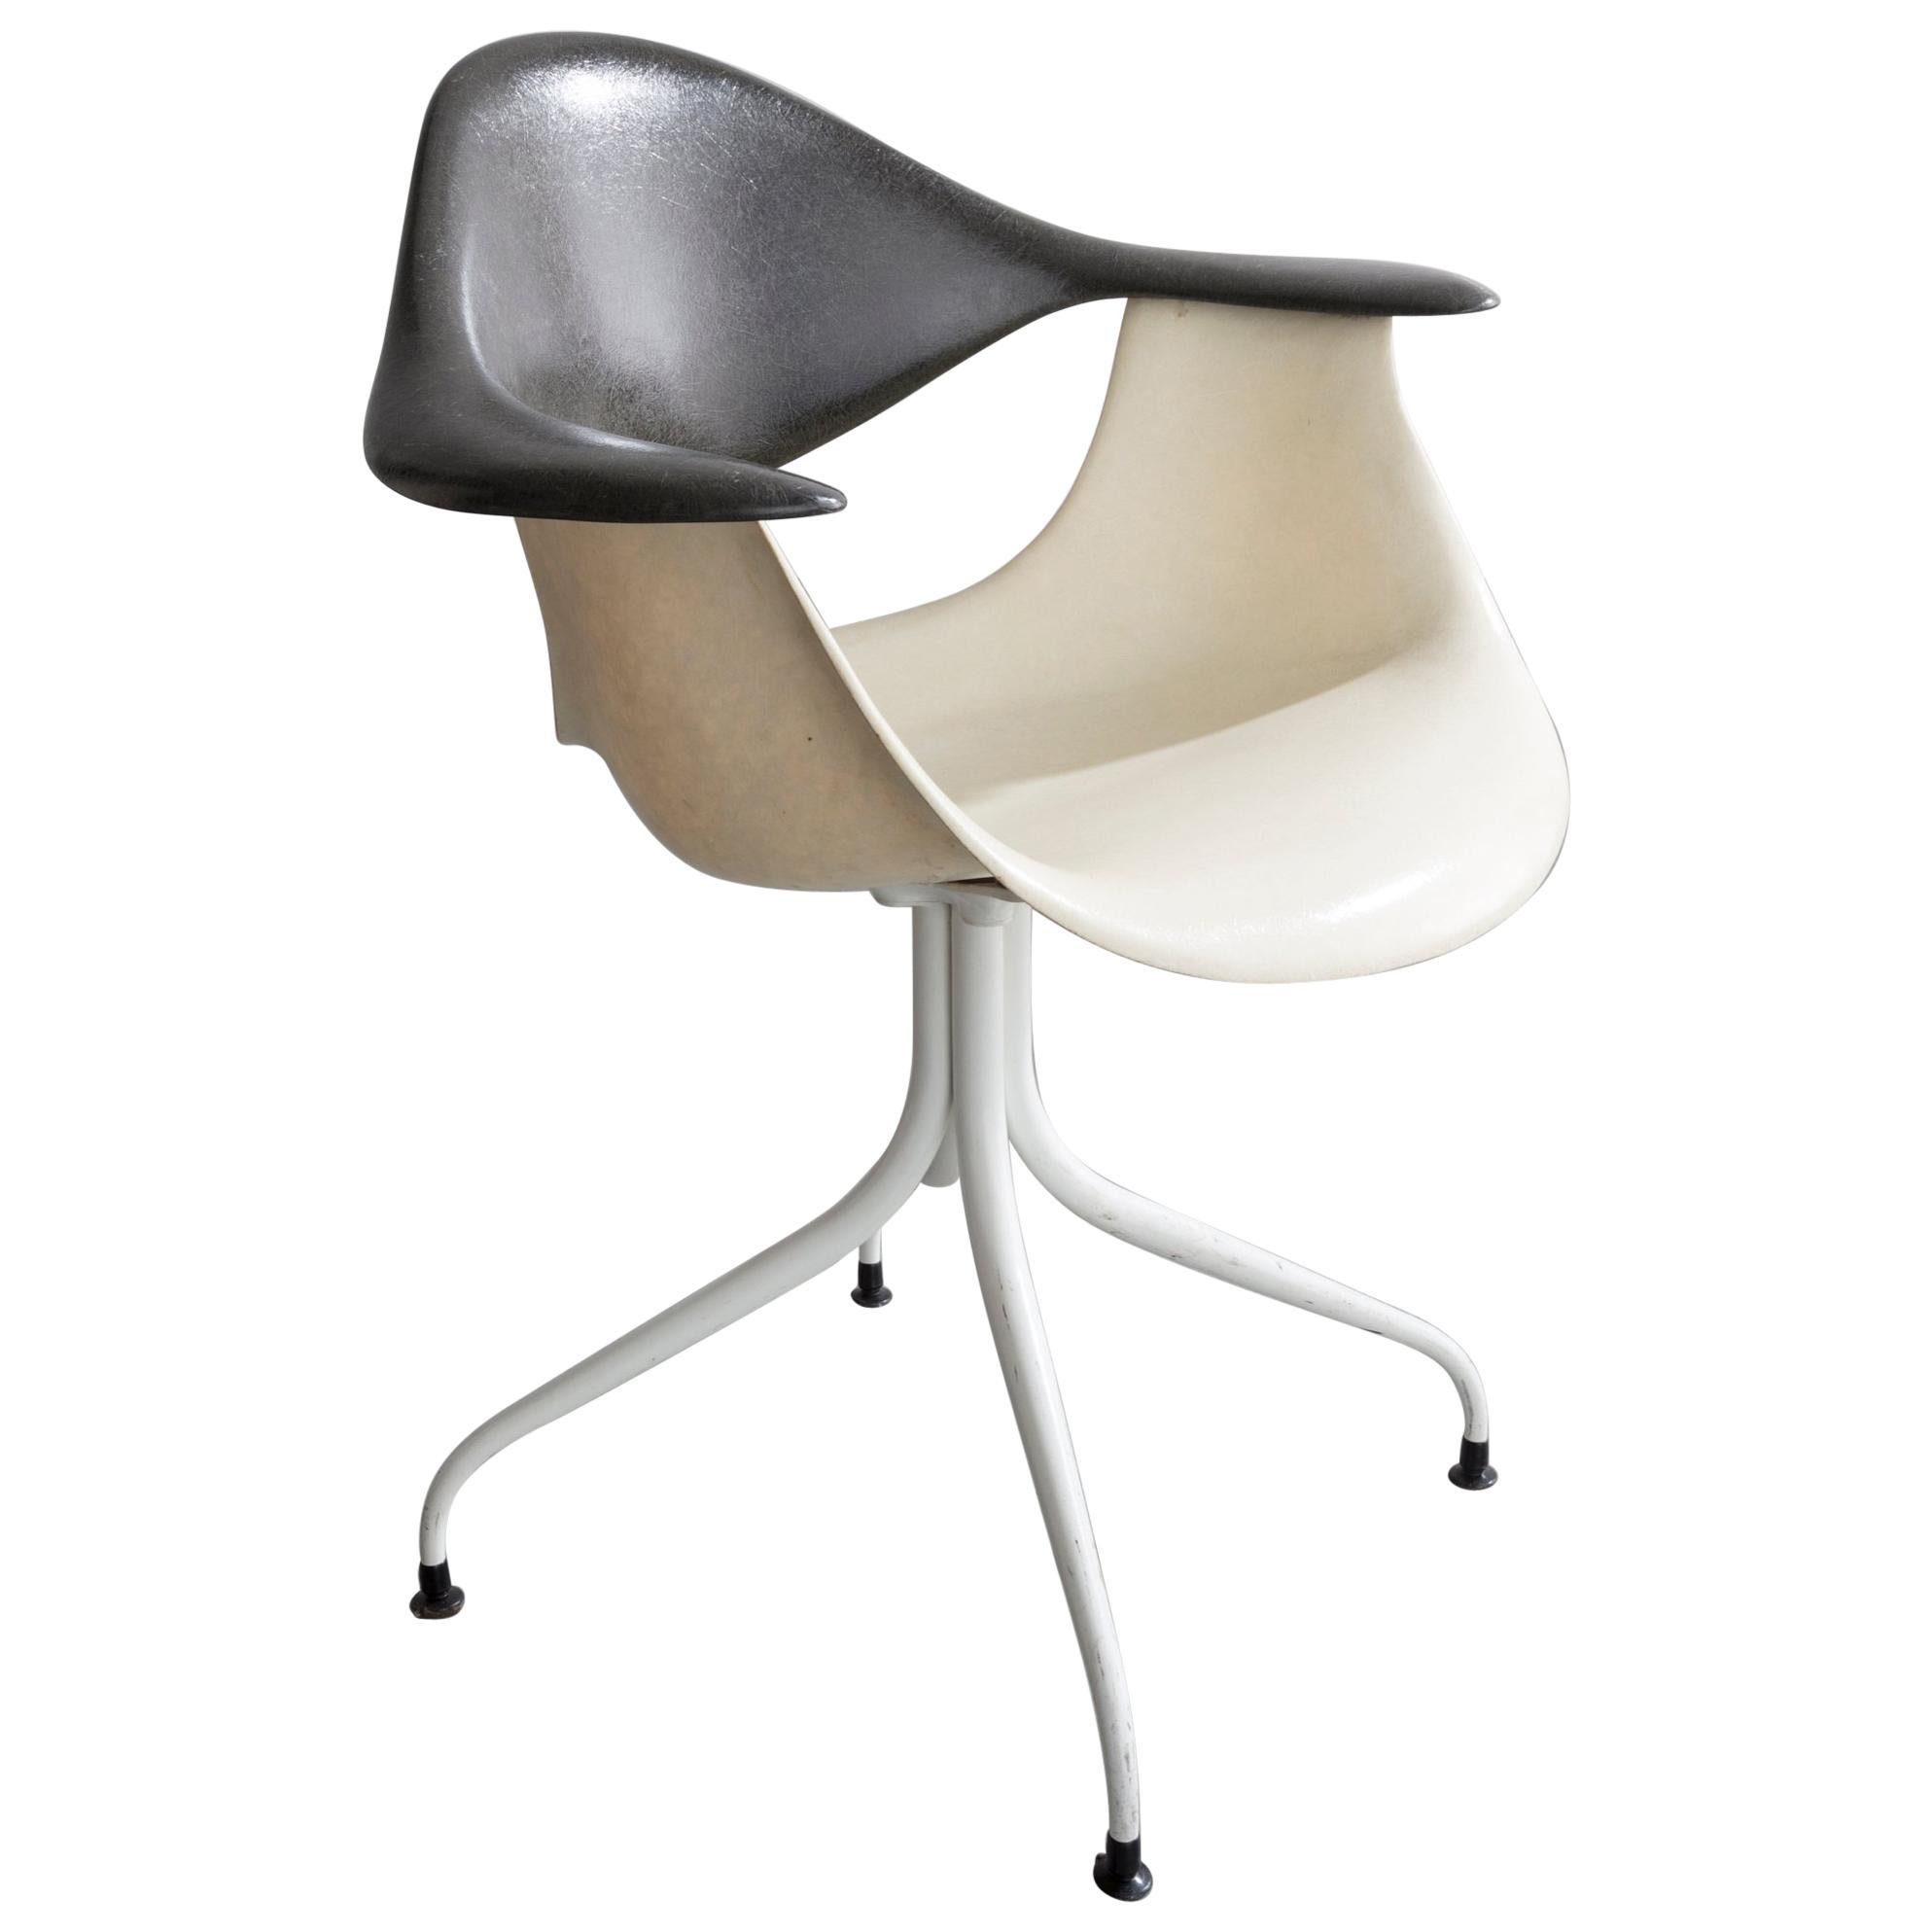 Swaged Leg Chair in Gray and White by Georg Nelson & Associates, 1954